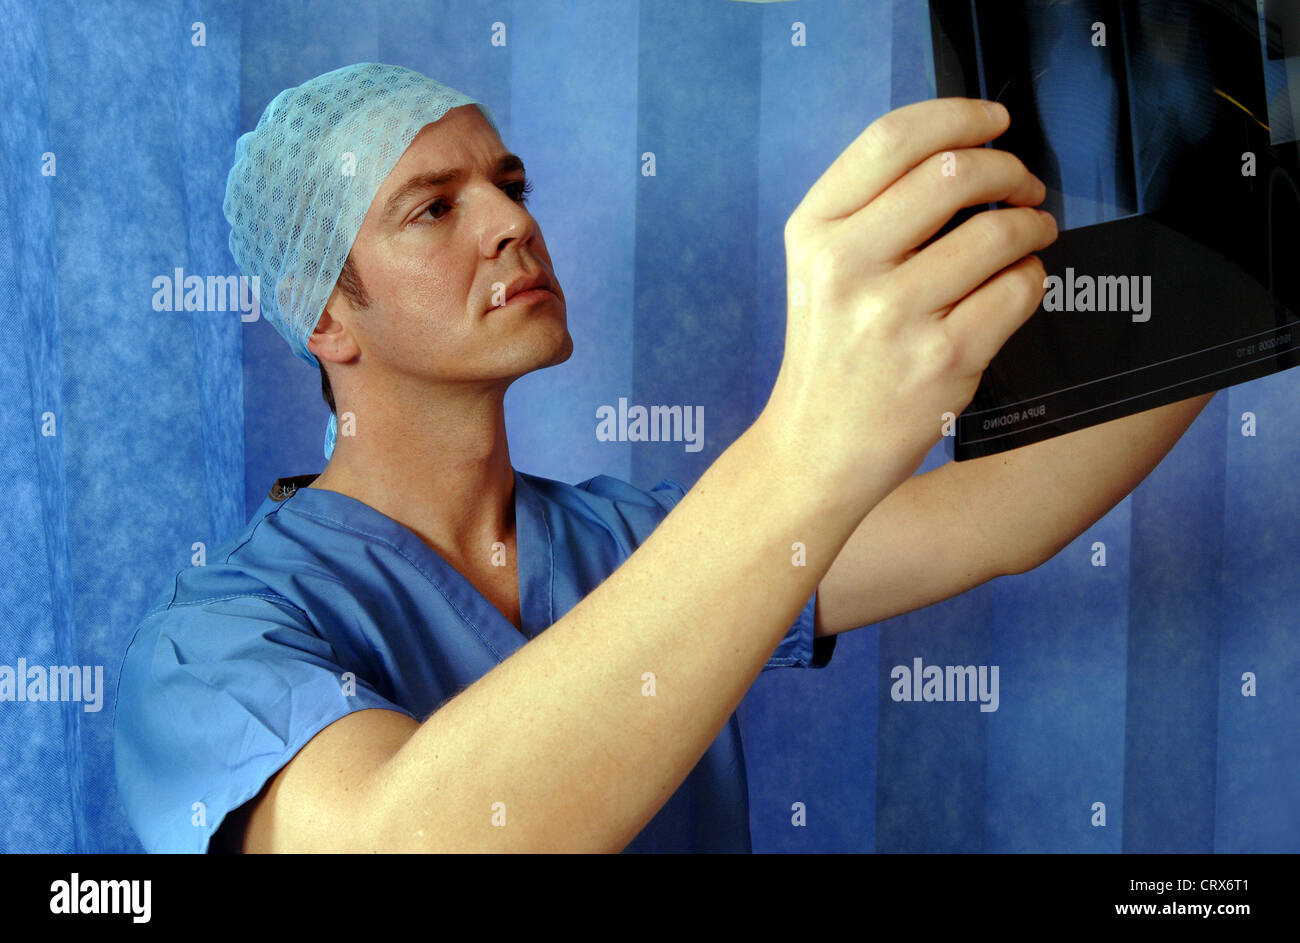 A surgeon wearing blue surgical cap and gown, reviewing a patient's x-ray. Stock Photo